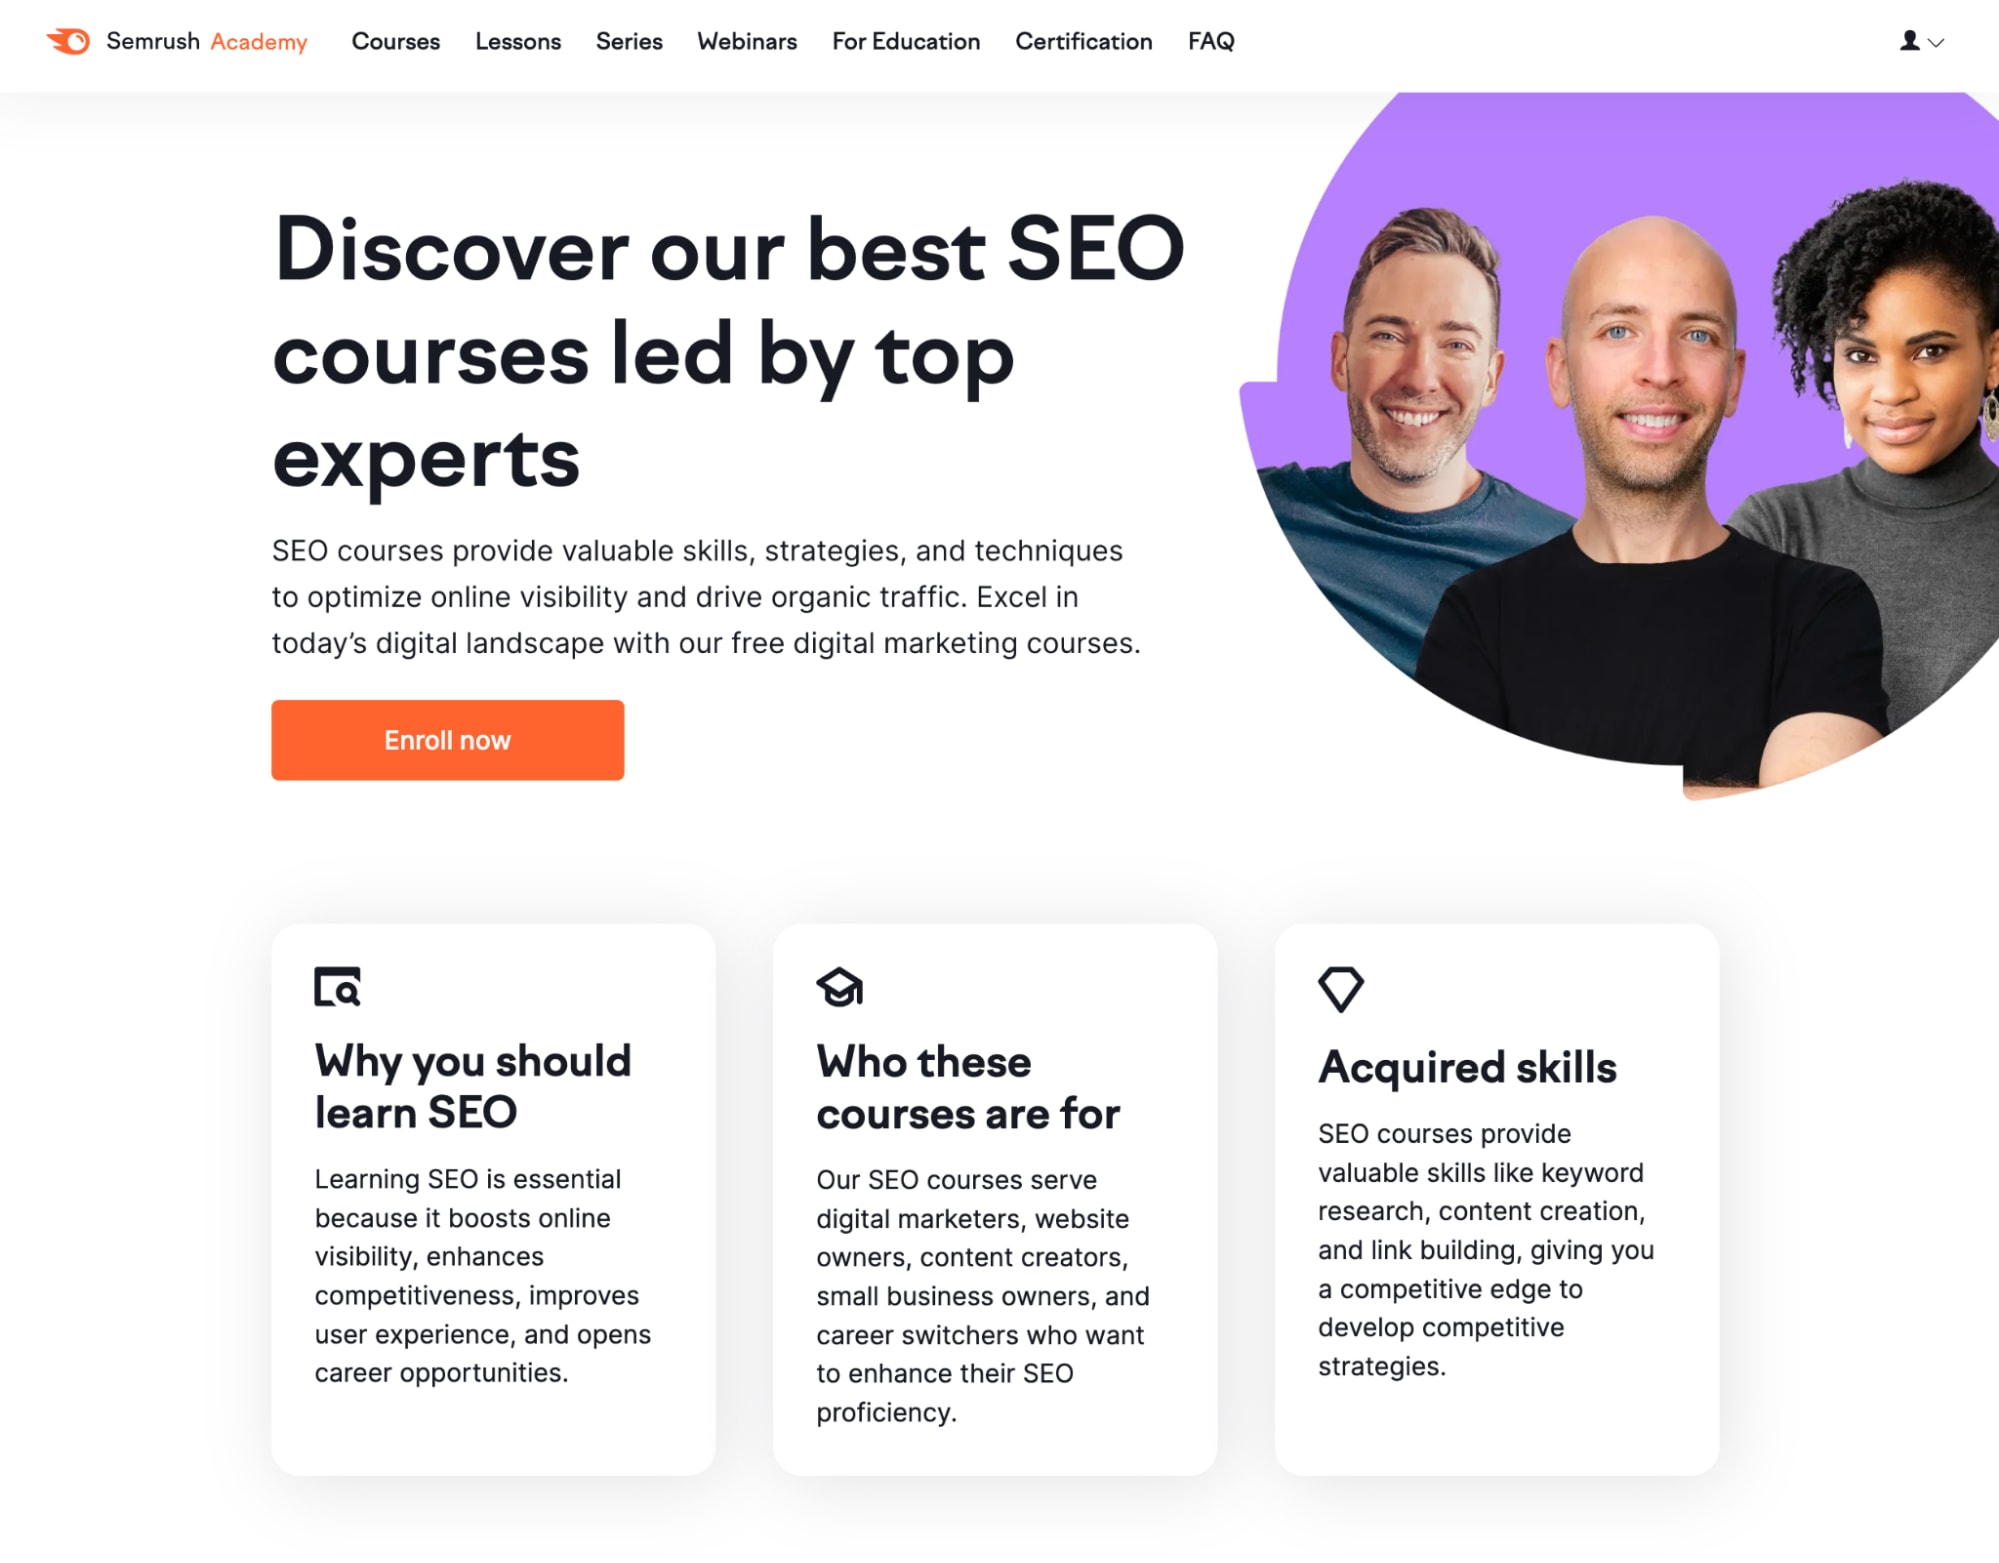 landing page for Semrush Academy to learn SEO